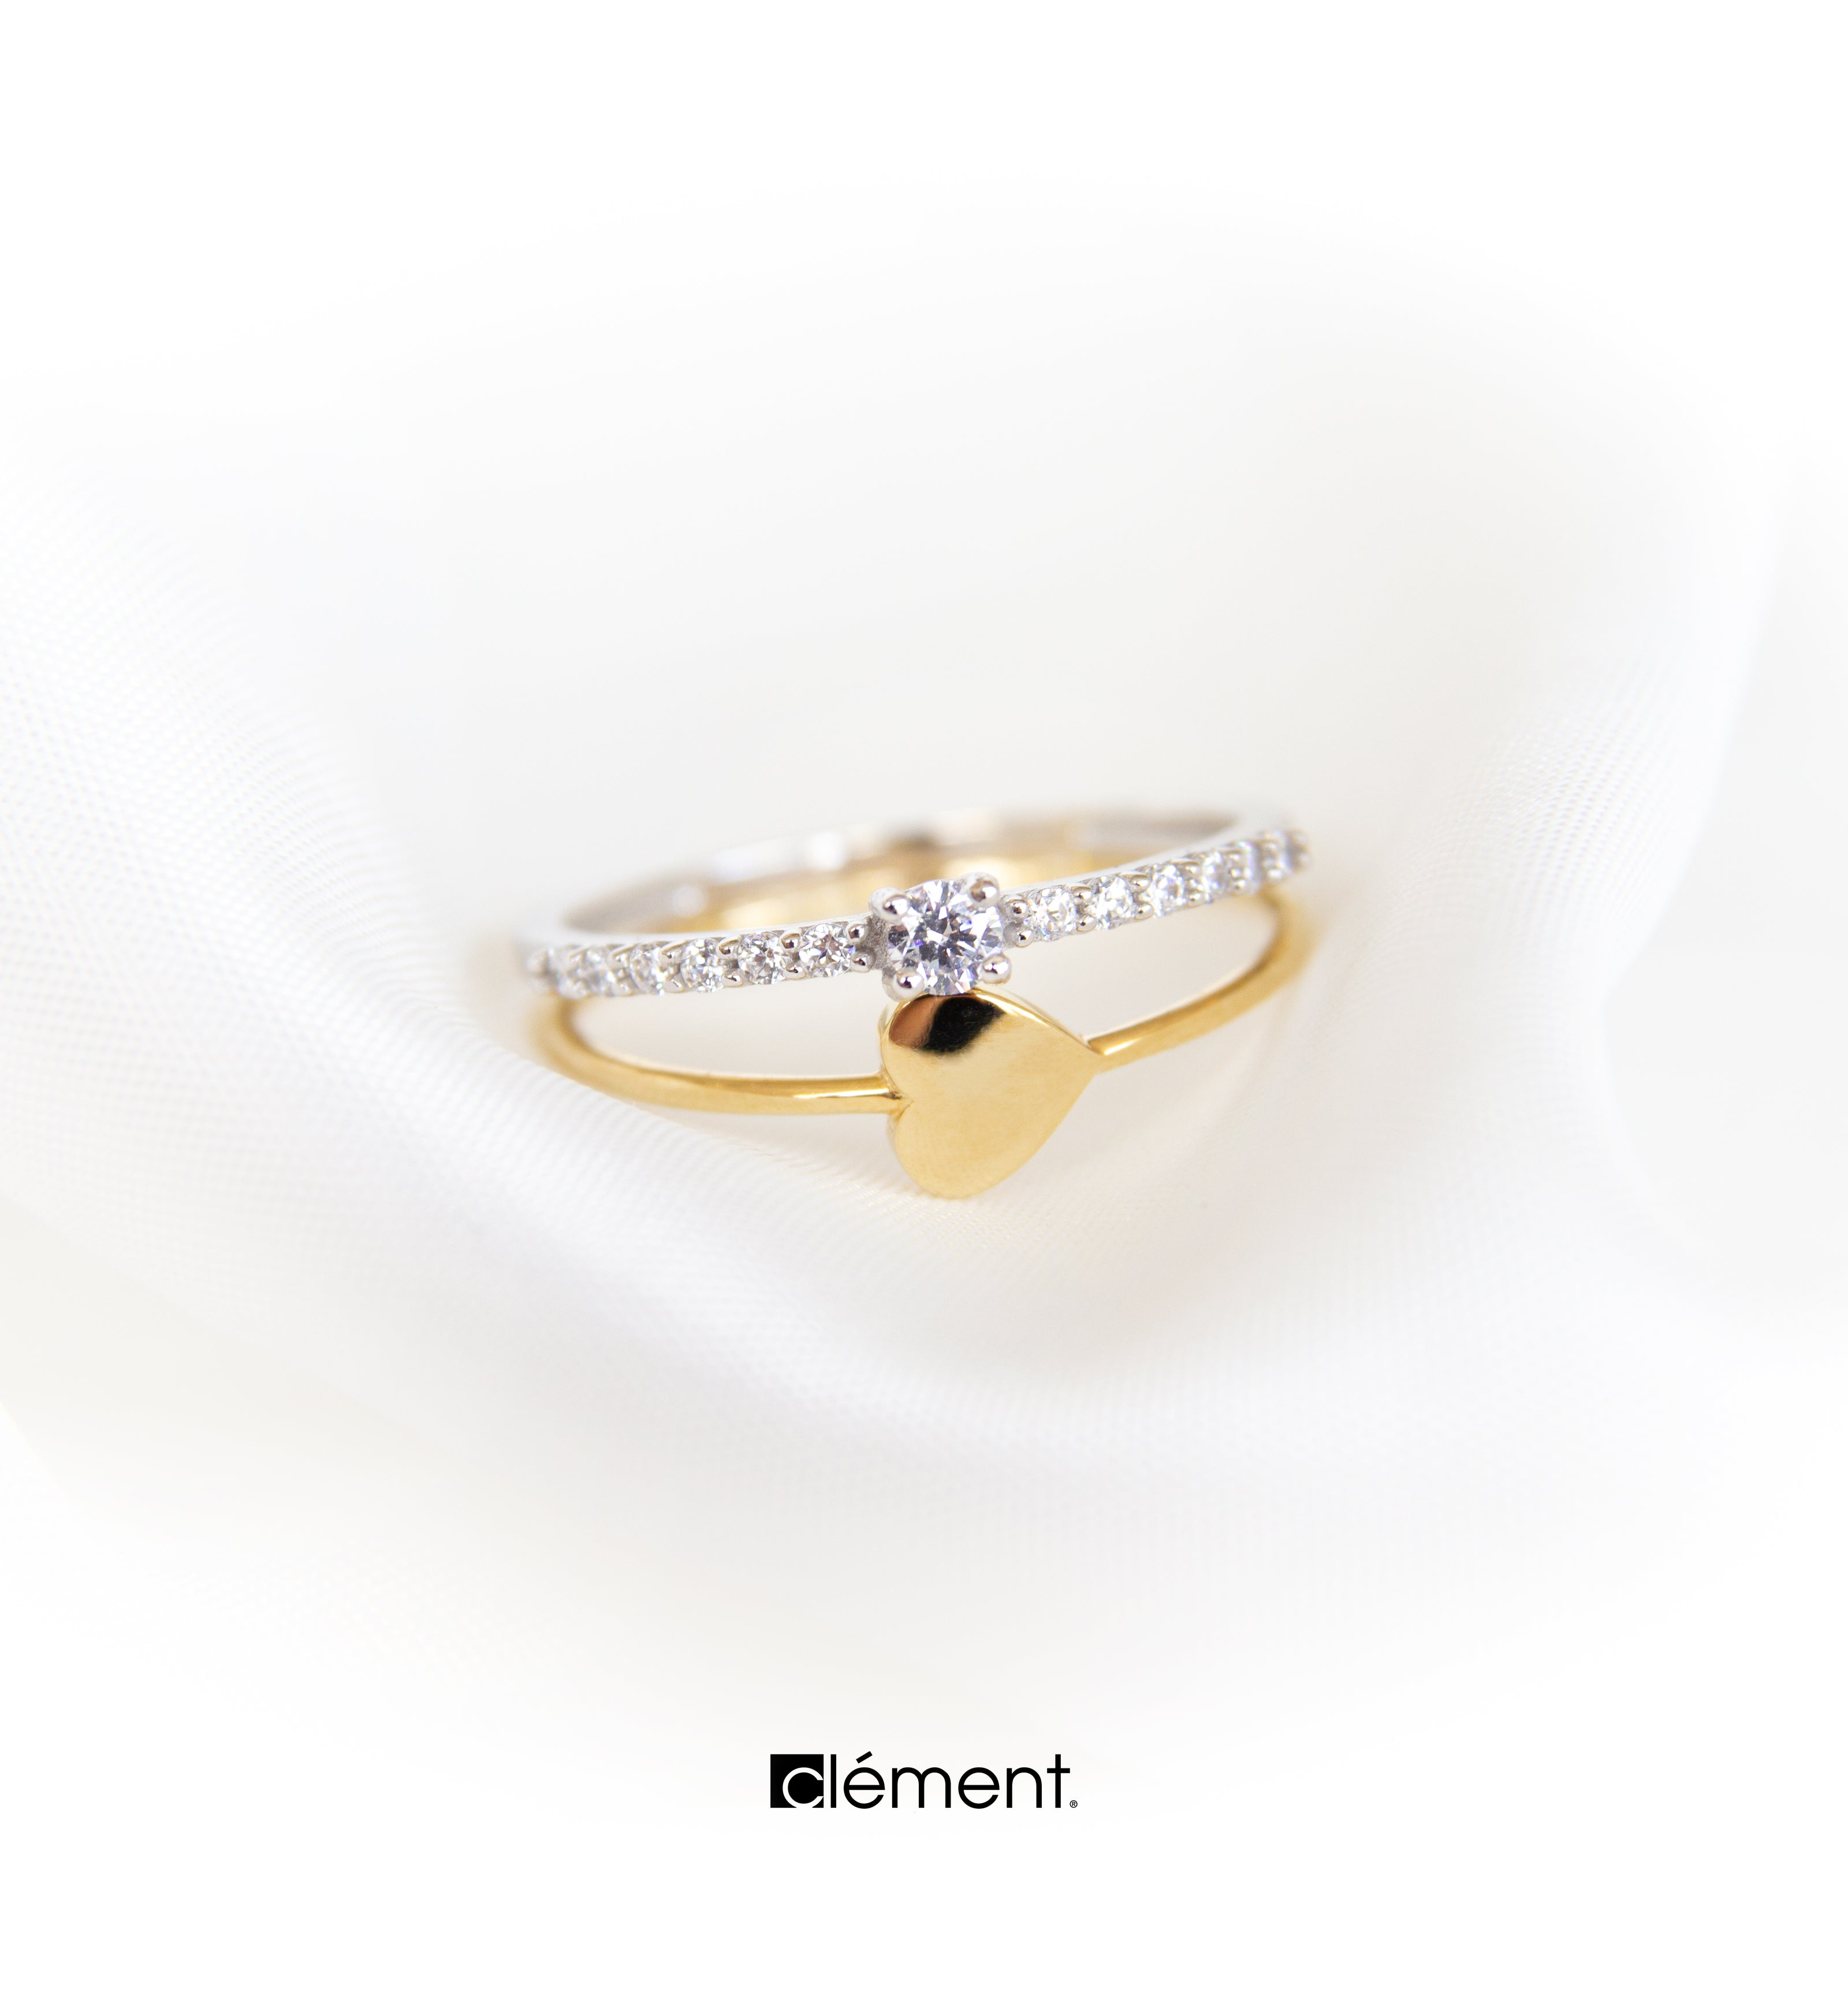 18ct Gold Heart Ring with Cubic Zircon Stones